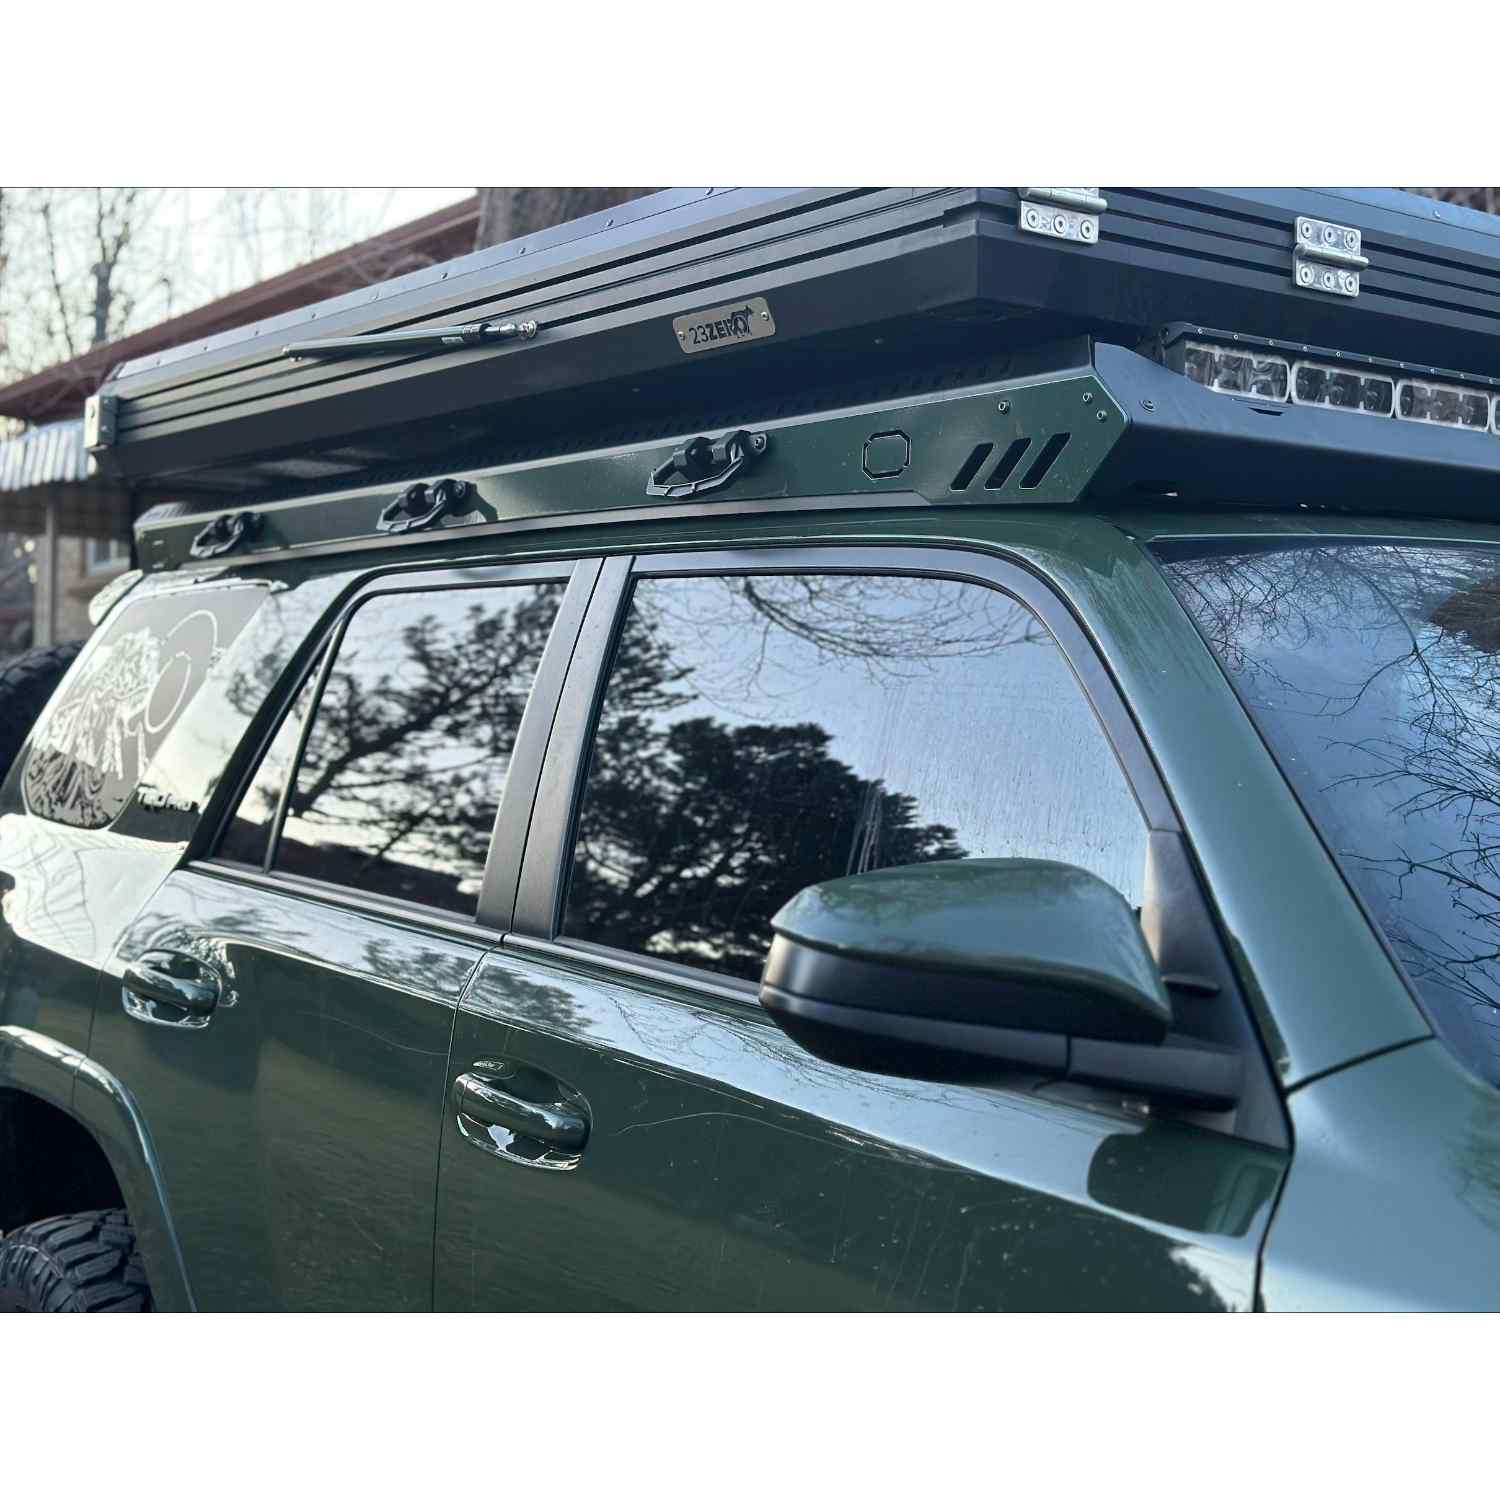 Uptop Overland Zulu 5G 2009-Current Toyota 4Runner Roof Rack Rght Side View